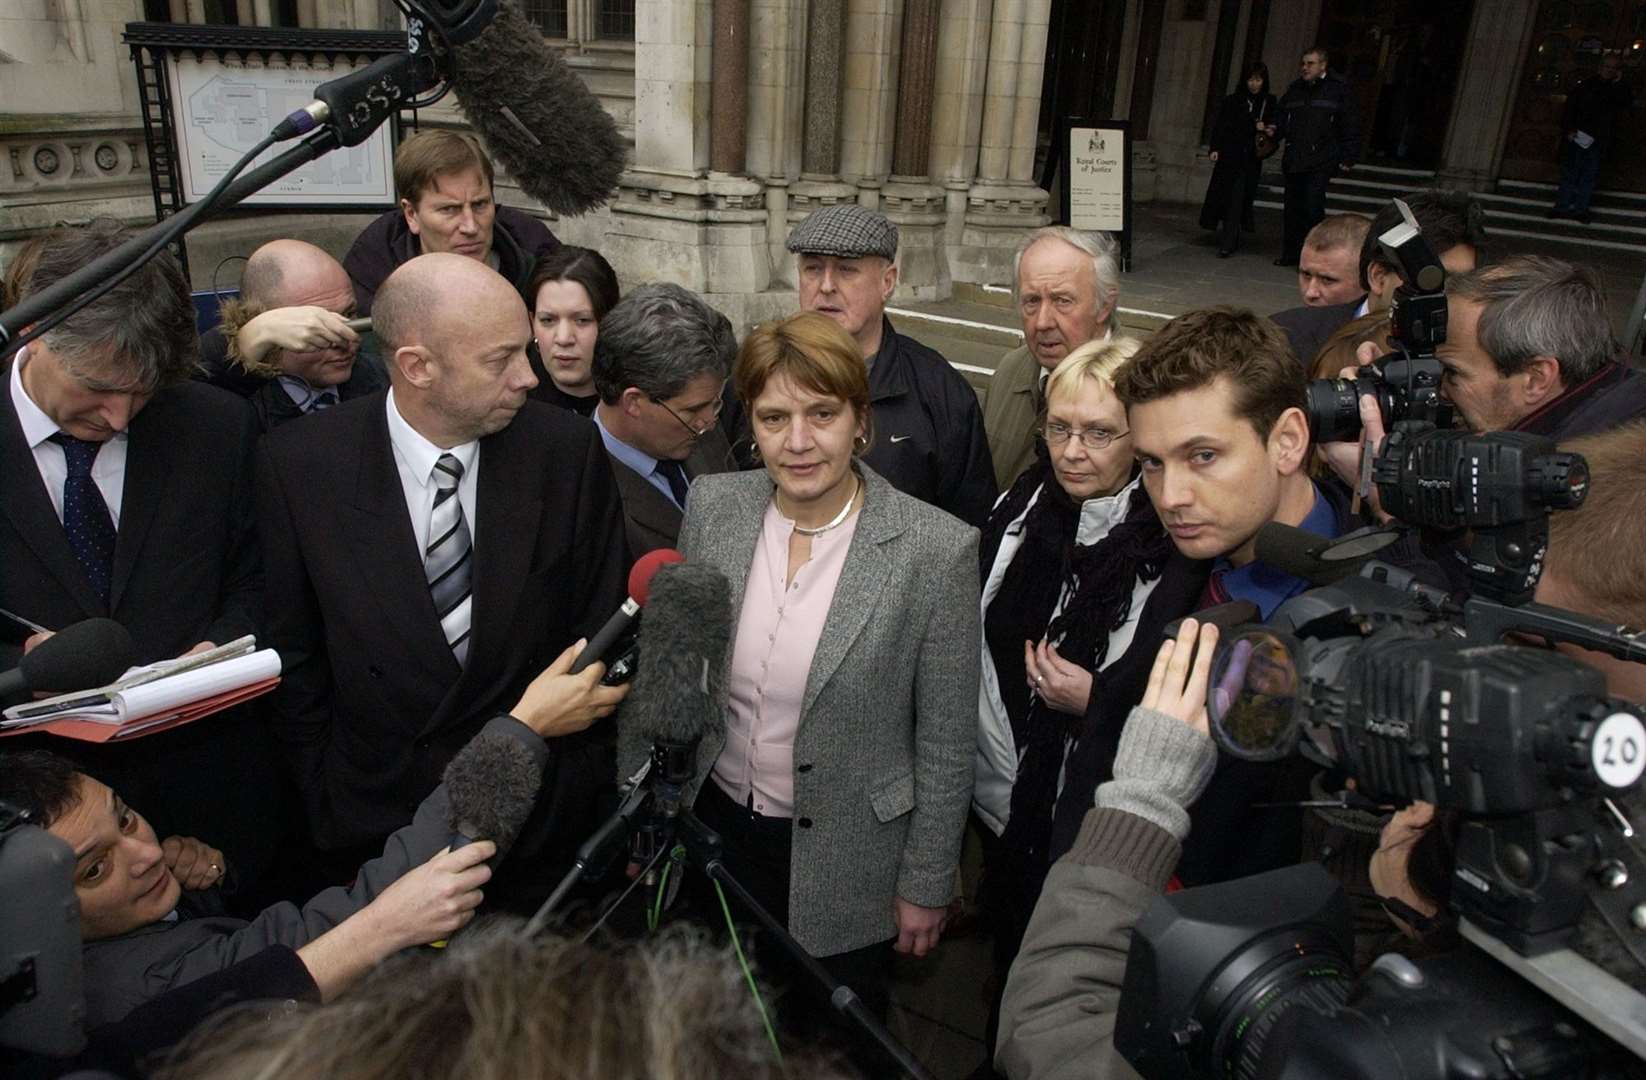 Barbara Stone outside the High Court to speak to the media about her brother's failed appeal in 2005